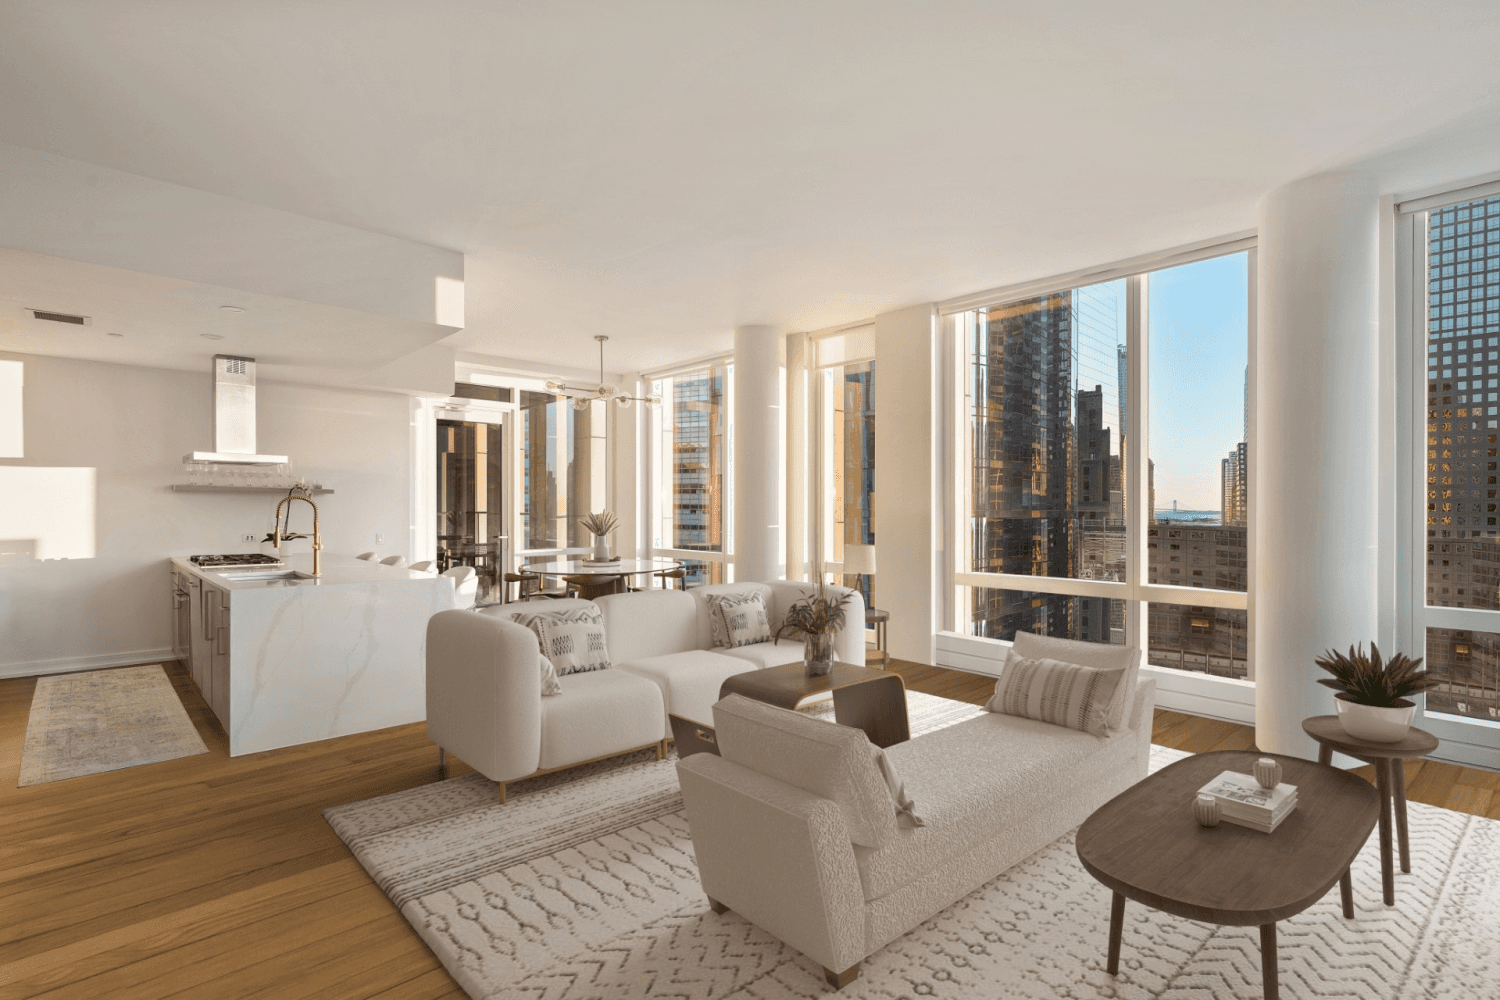 Welcome to this impeccable Tribeca luxury home with a private outdoor loggia, upgraded finishes, and stunning Southern and Western views in a full service condo with deluxe amenities.